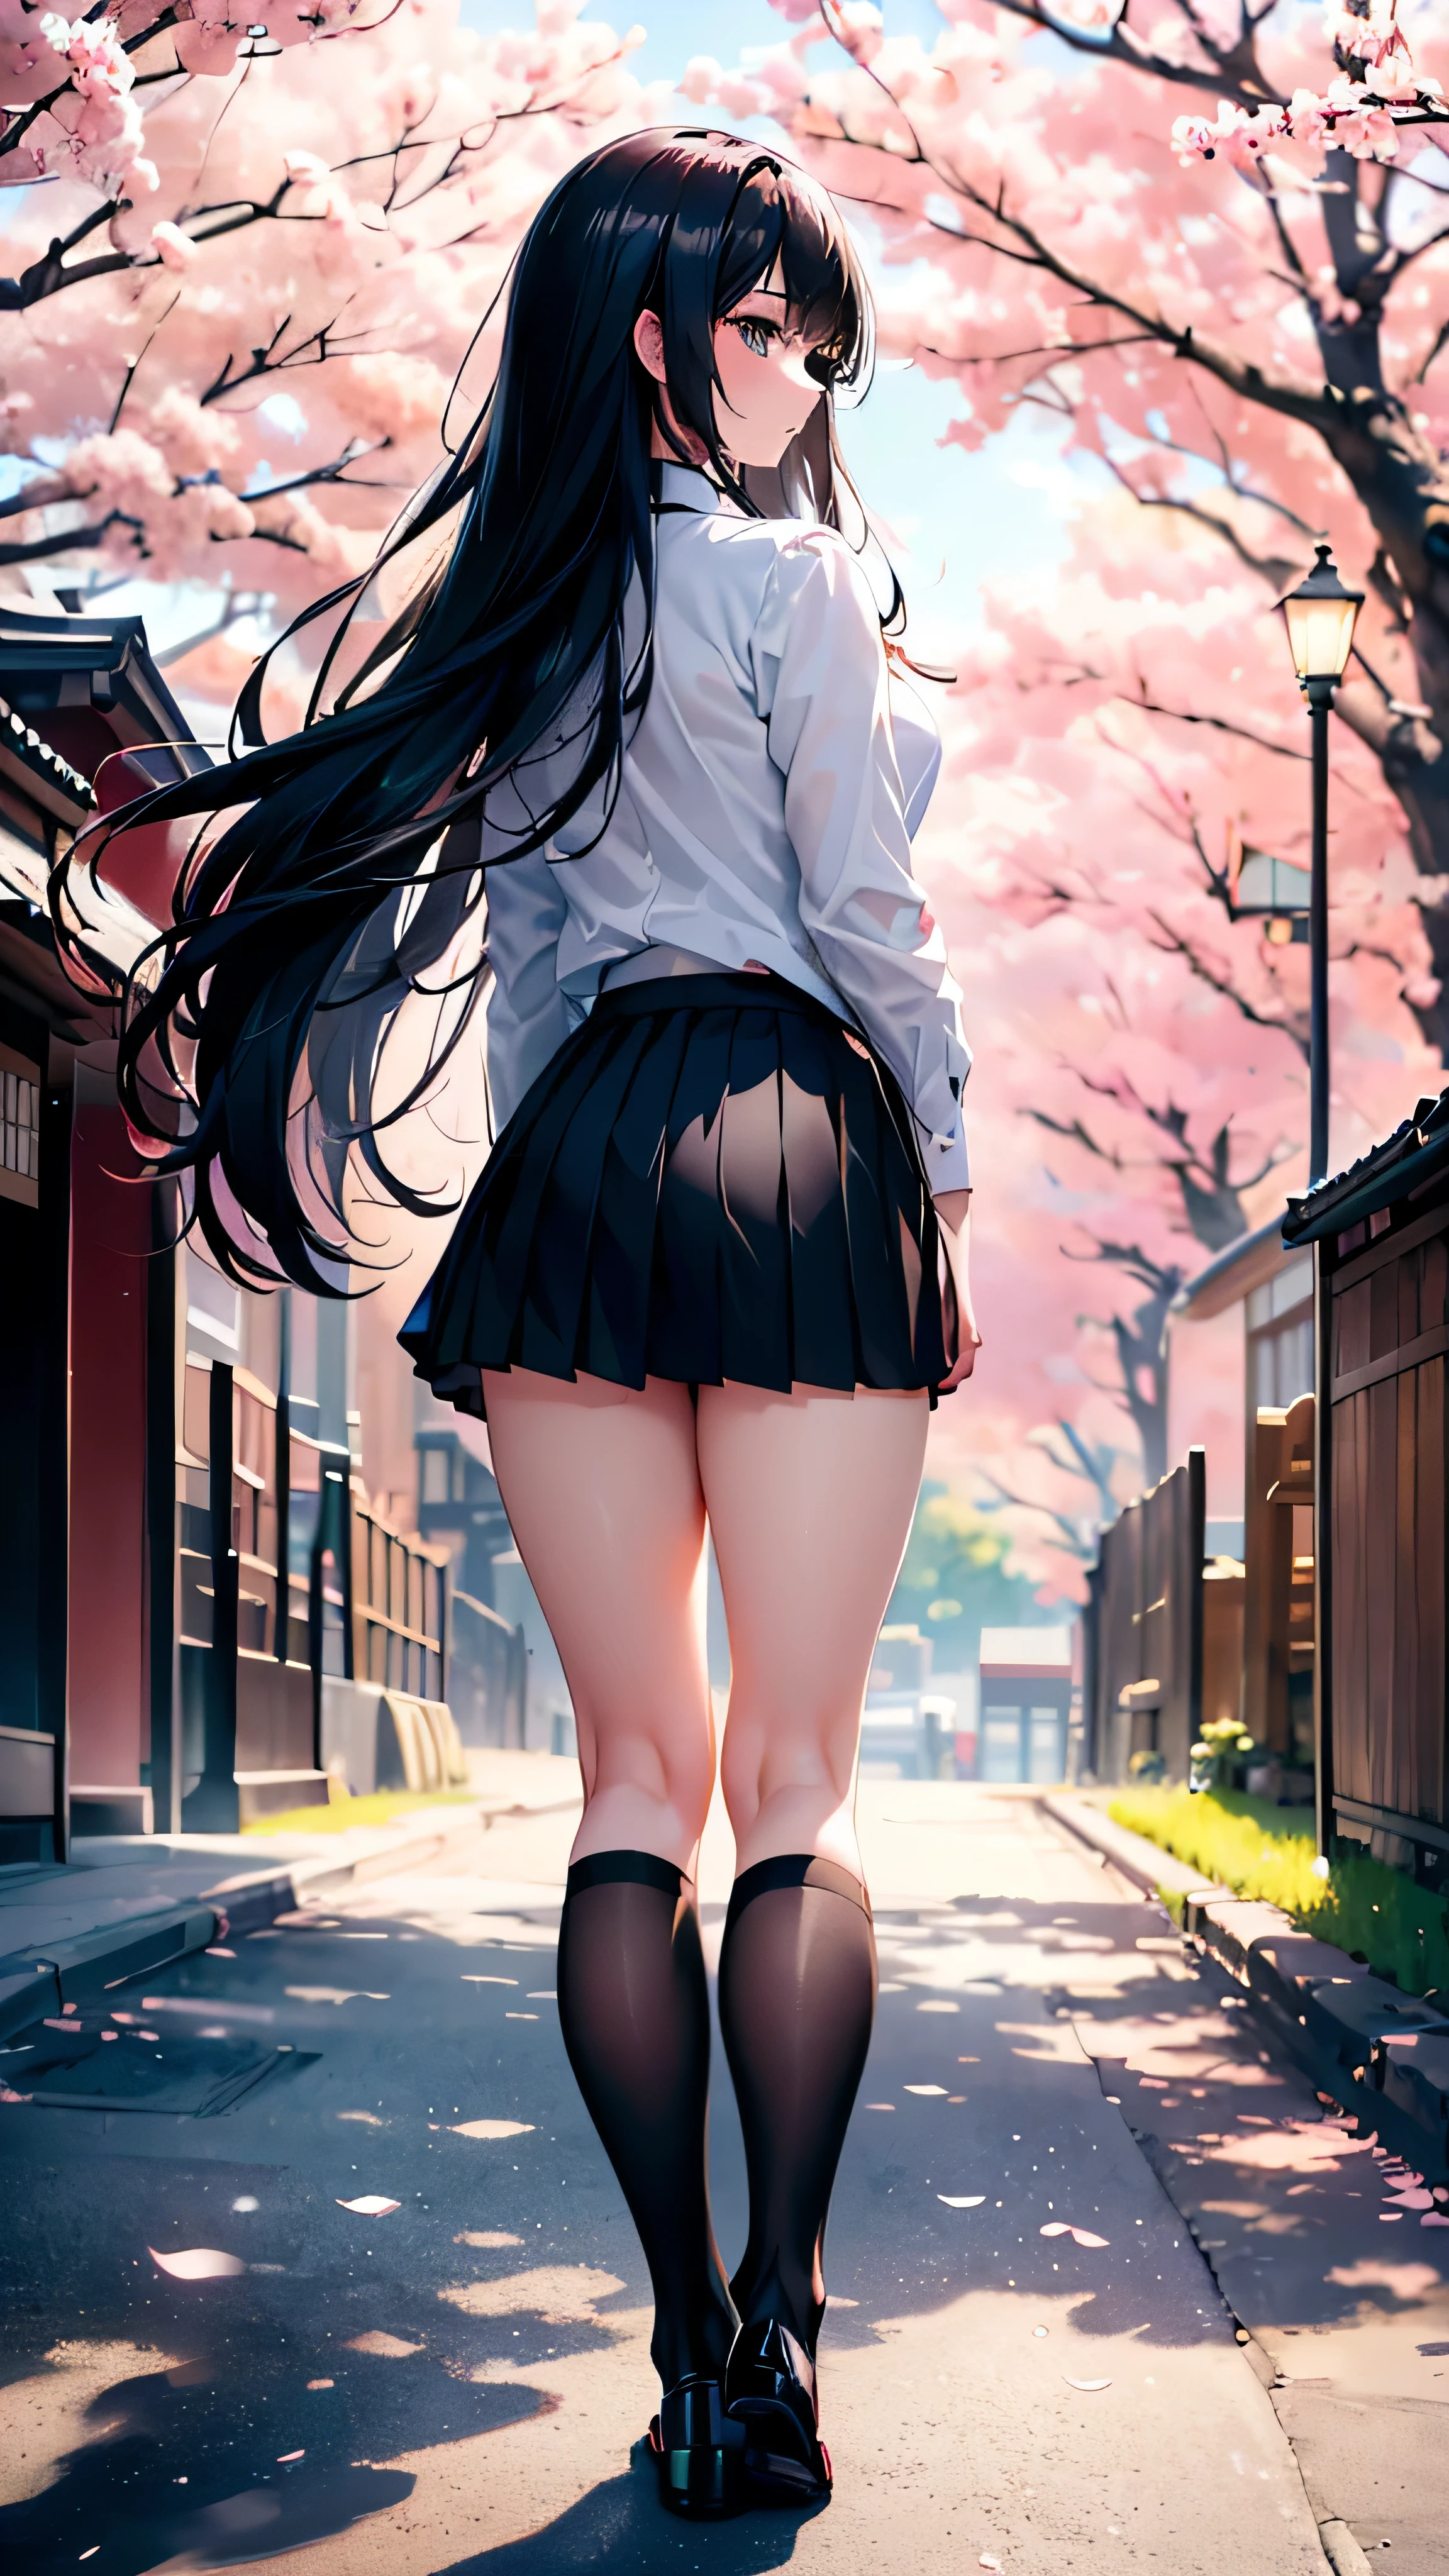 ((best quality)), ((masterpiece)), (detailed), (High contrast natural side daylight, dynamic lighting, movie lighting), 
((Turn your back to the camera)), whole body, 1 girl, Rear view, ((Japanese)), perfect body structure, Sexy body shape, Fair and glowing skin, Long hair fluttering in the wind, (((extra long:1.6)))black curly hair, ((Delicate hair)), Slender and natural legs, perfect feet painting quality, Exquisite finger painting quality, Cute back and side, 
((symmetrical clothes, uniform, white collar shirt, Black pleated mini skirt，dark stockings, Dark student shoes)) , perfect feet, (Beautiful scenery), (outdoor breeze), Quiet Japanese city street, spring morning, ((Cherry blossoms)), whole body images, ((perfect composition, golden section)), Prominent theme, (((eye level photography:1))), (Detailed depiction of environmental details:1.5), Depth of field control, ((Reduce color saturation slightly:1.2)), (Japanese style photos:0.3),